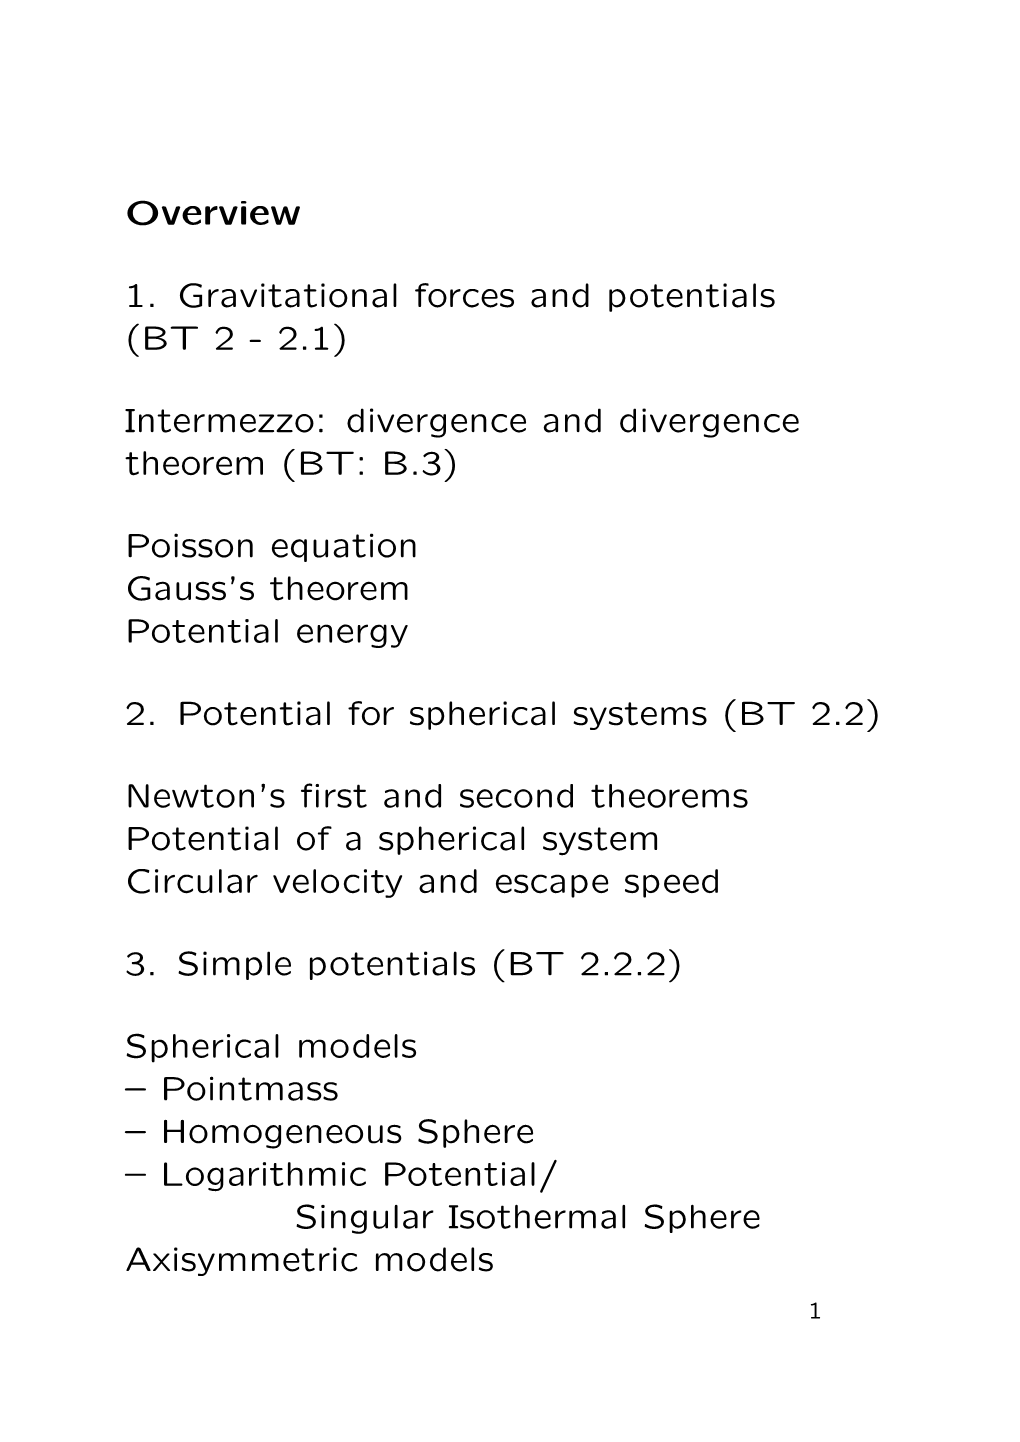 Overview 1. Gravitational Forces and Potentials (BT 2